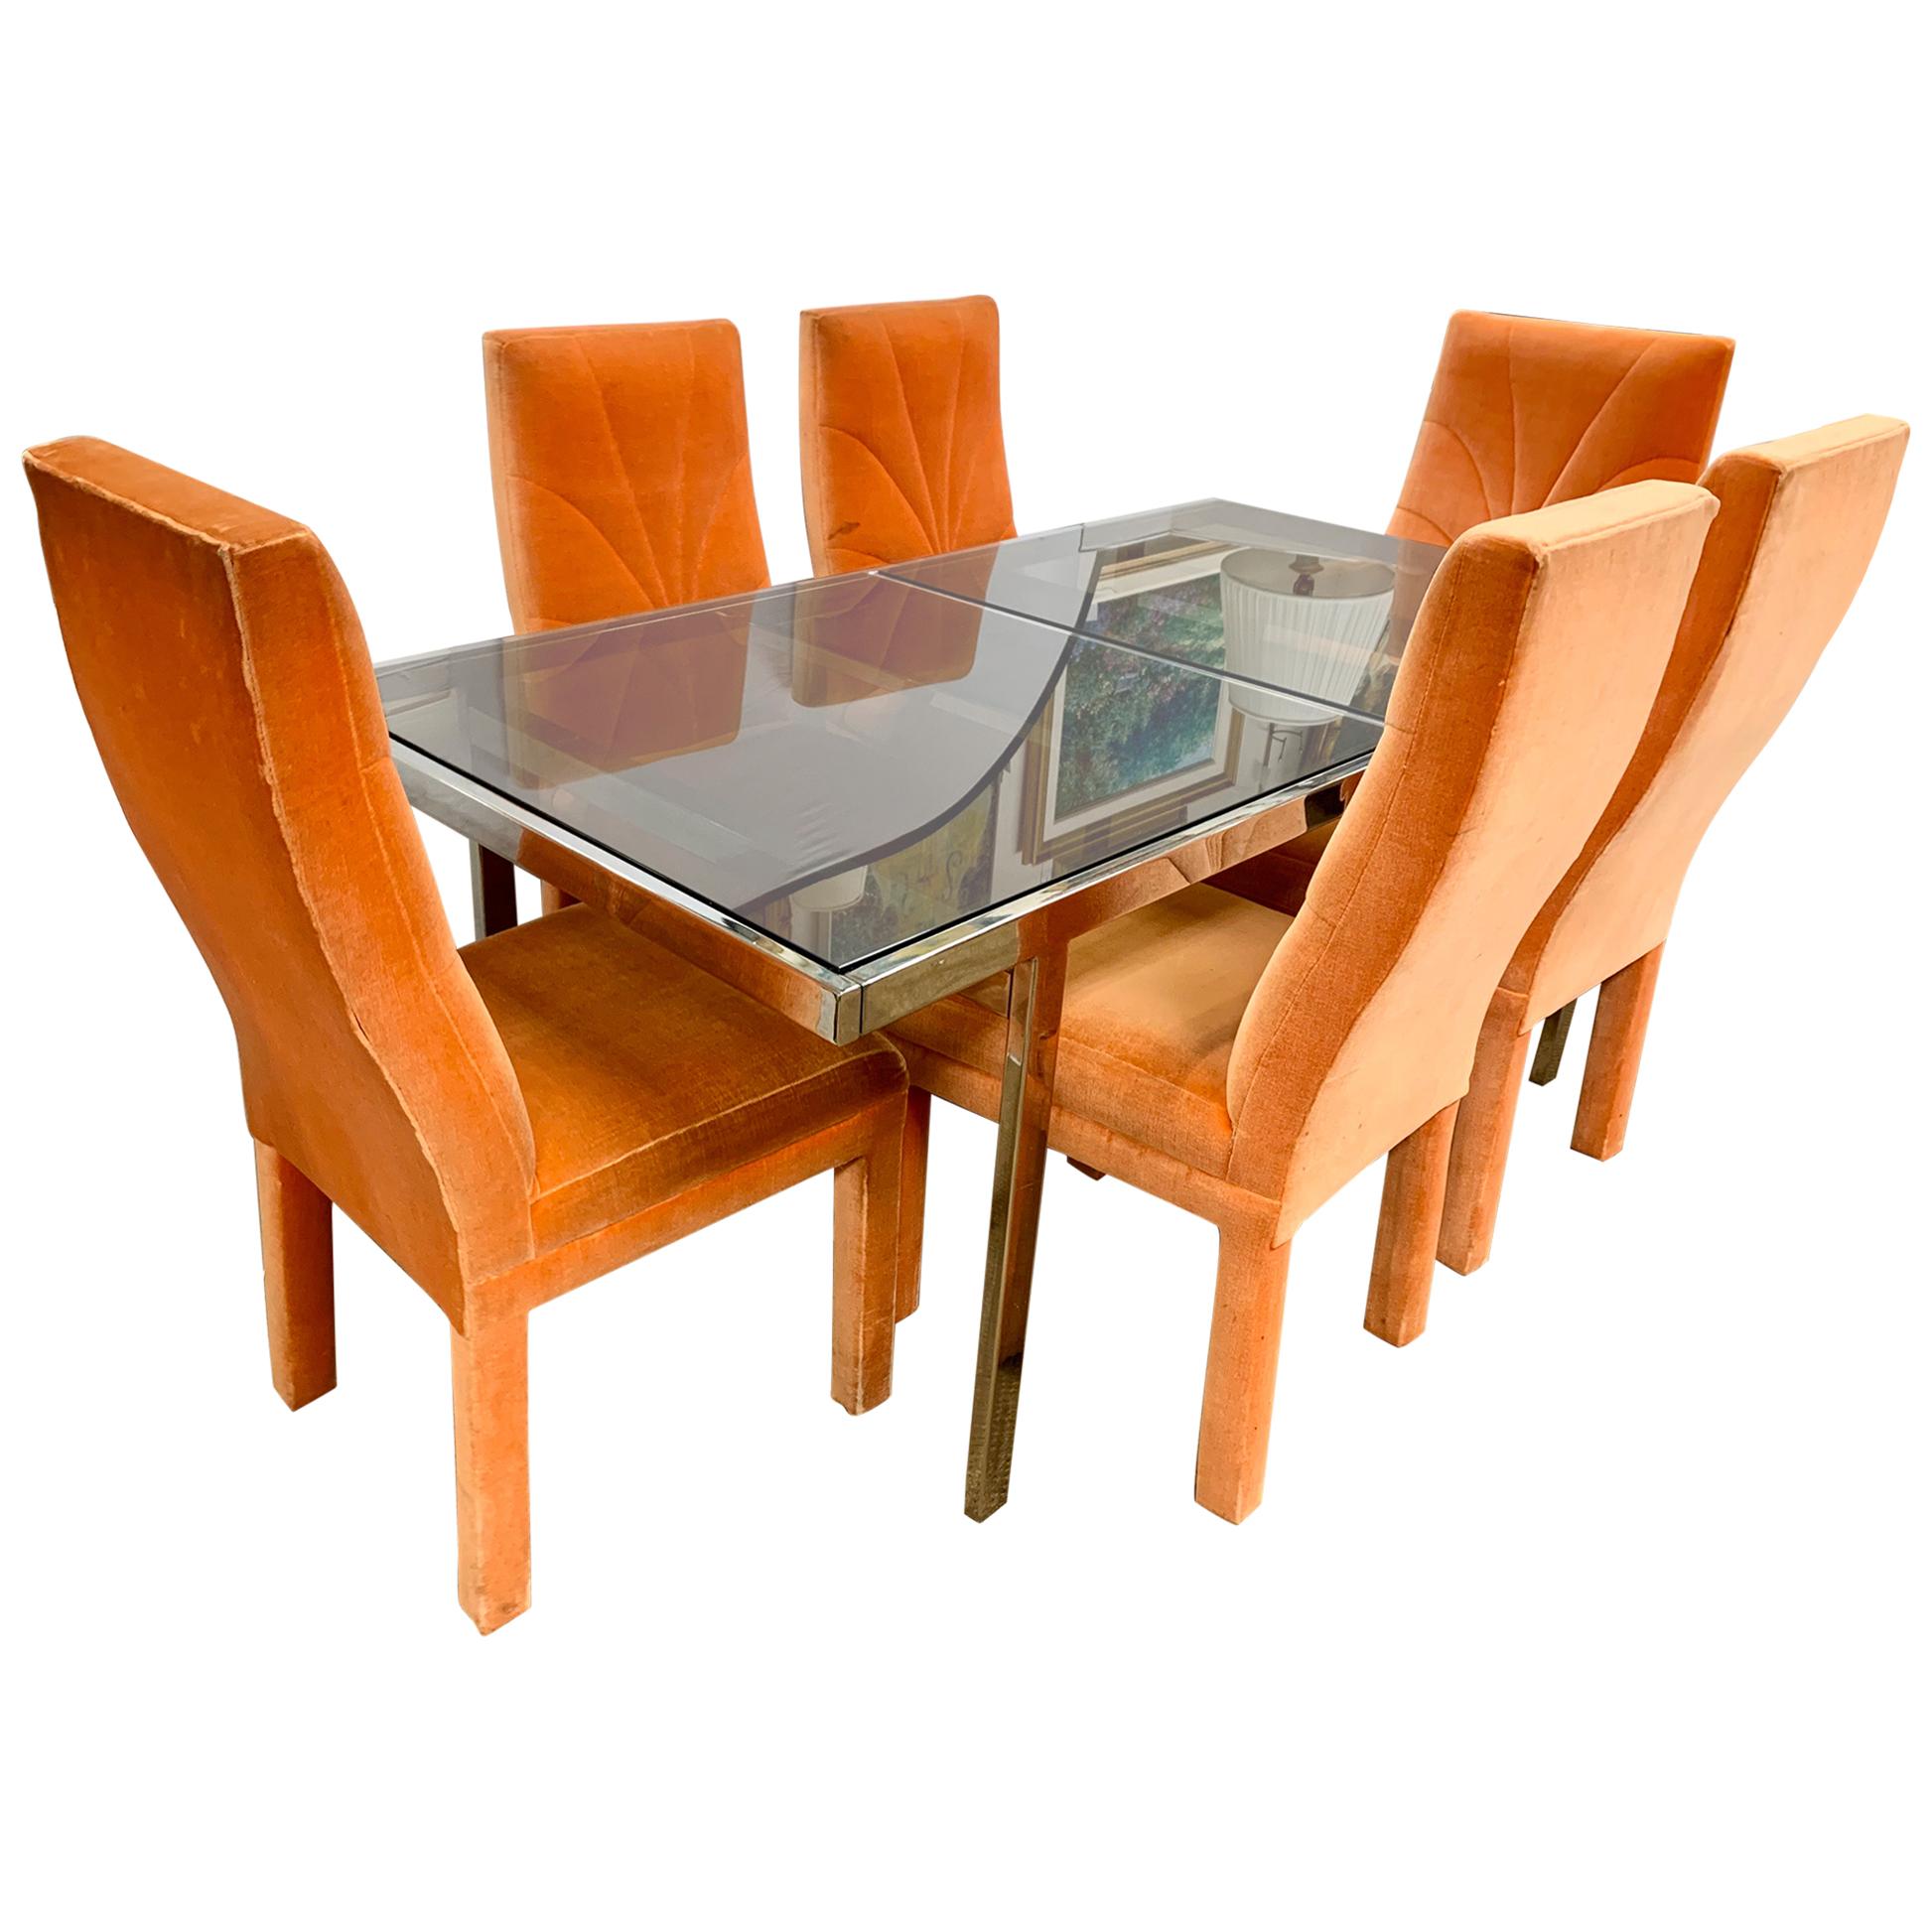 Comfort Designs Midcentury Dining Room Set Table and Six Chairs